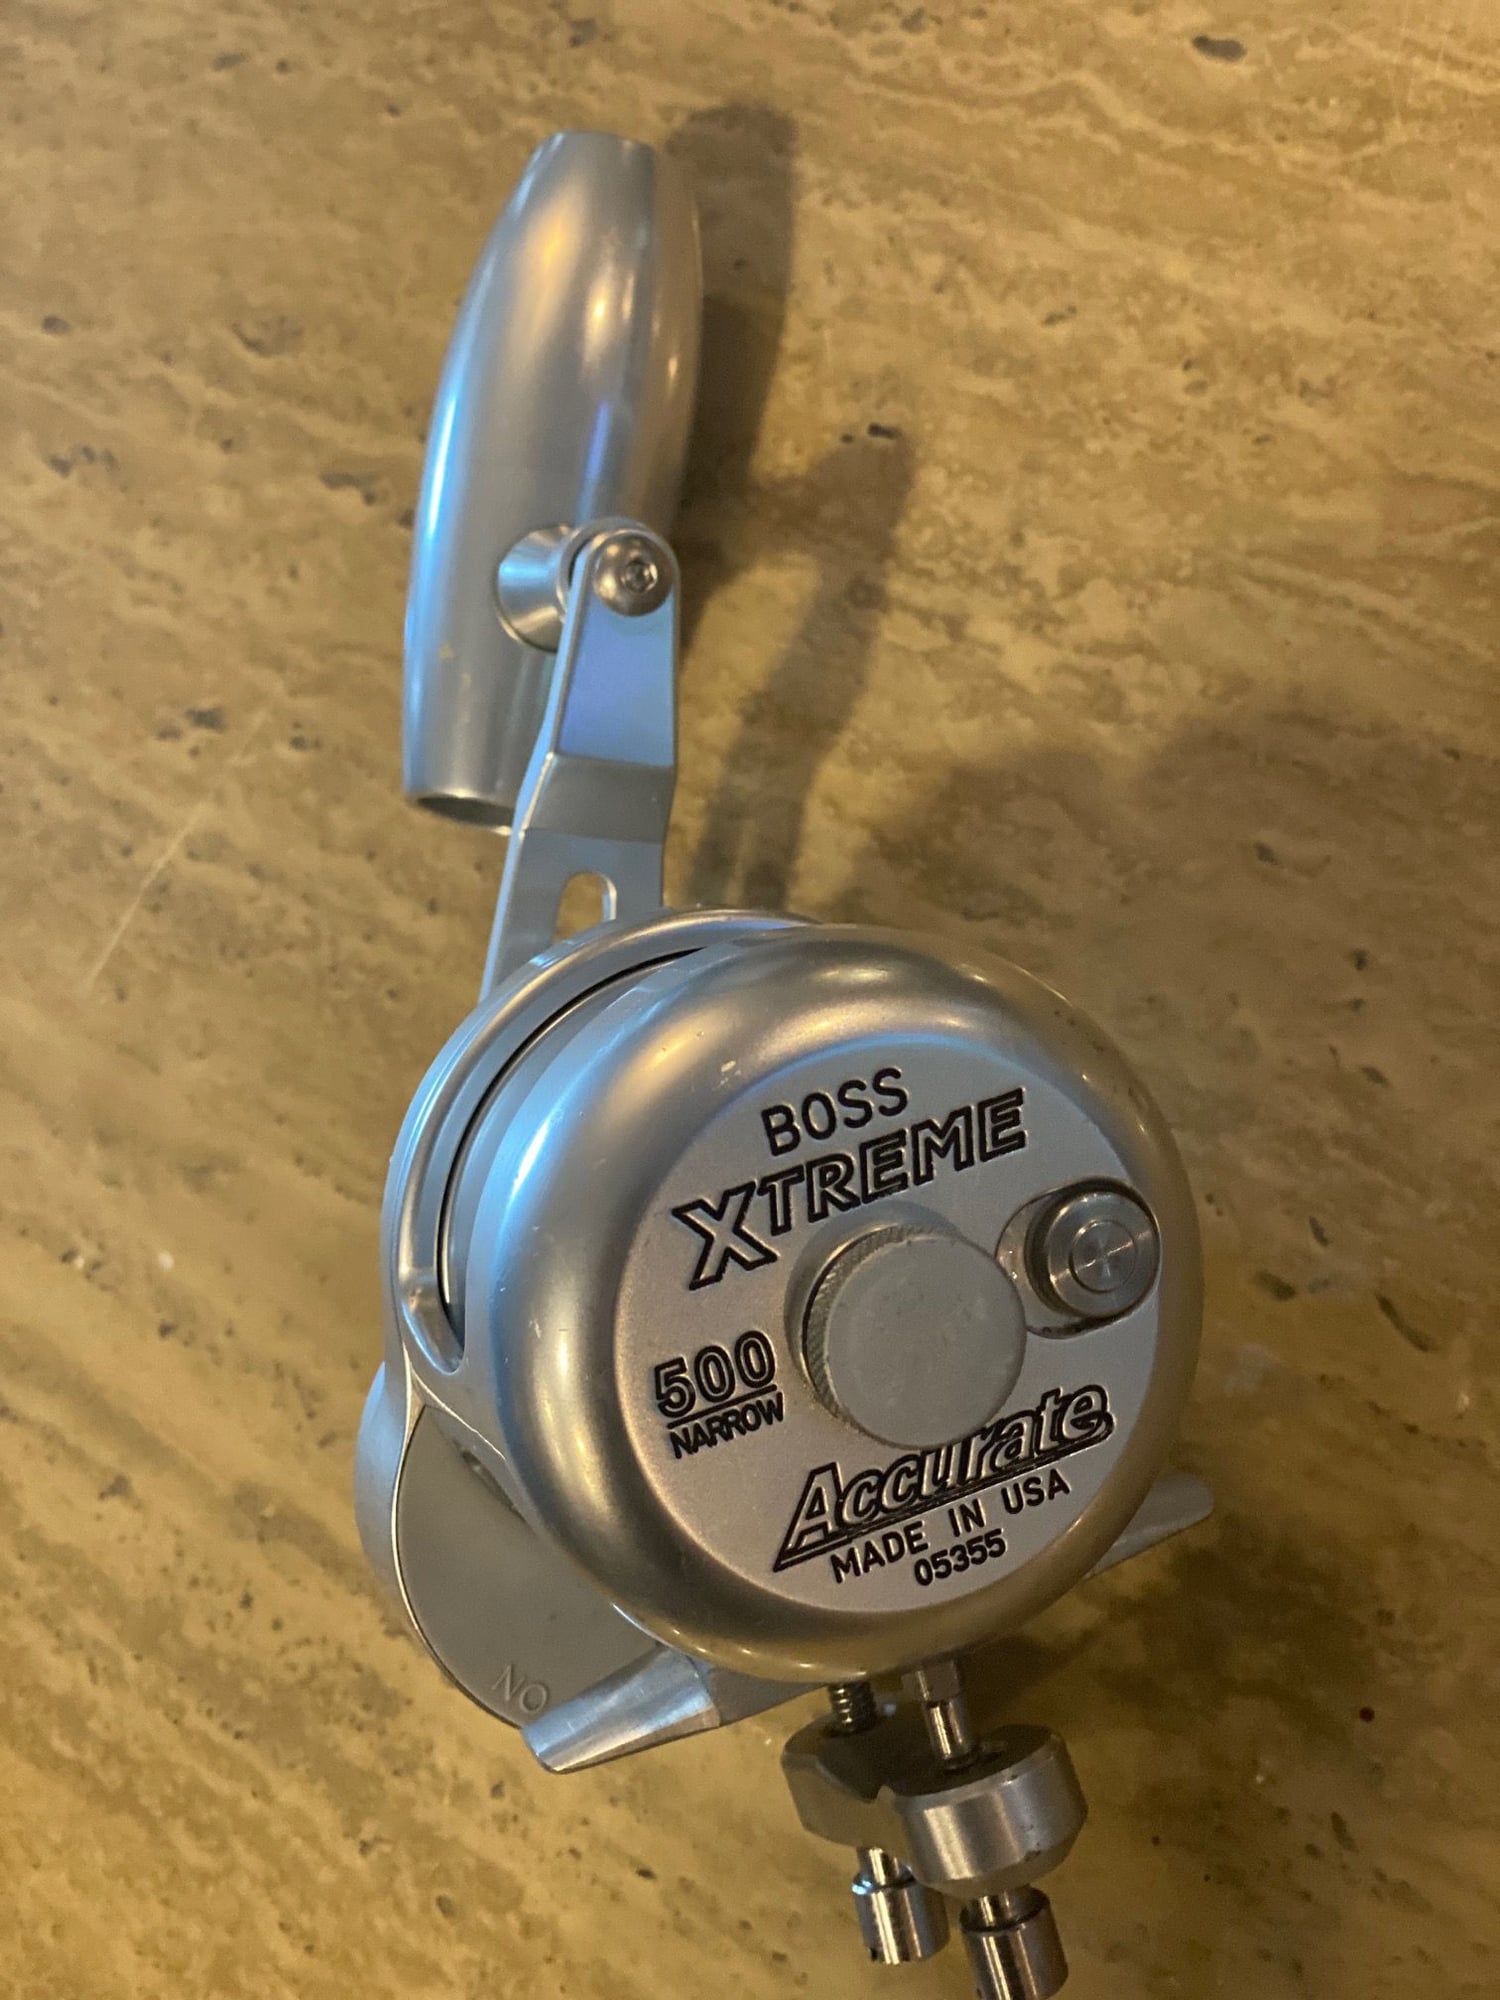 Accurate Boss Extreme 500n / Upgraded Handle/ Slow Pitch Jigging Reel - The  Hull Truth - Boating and Fishing Forum